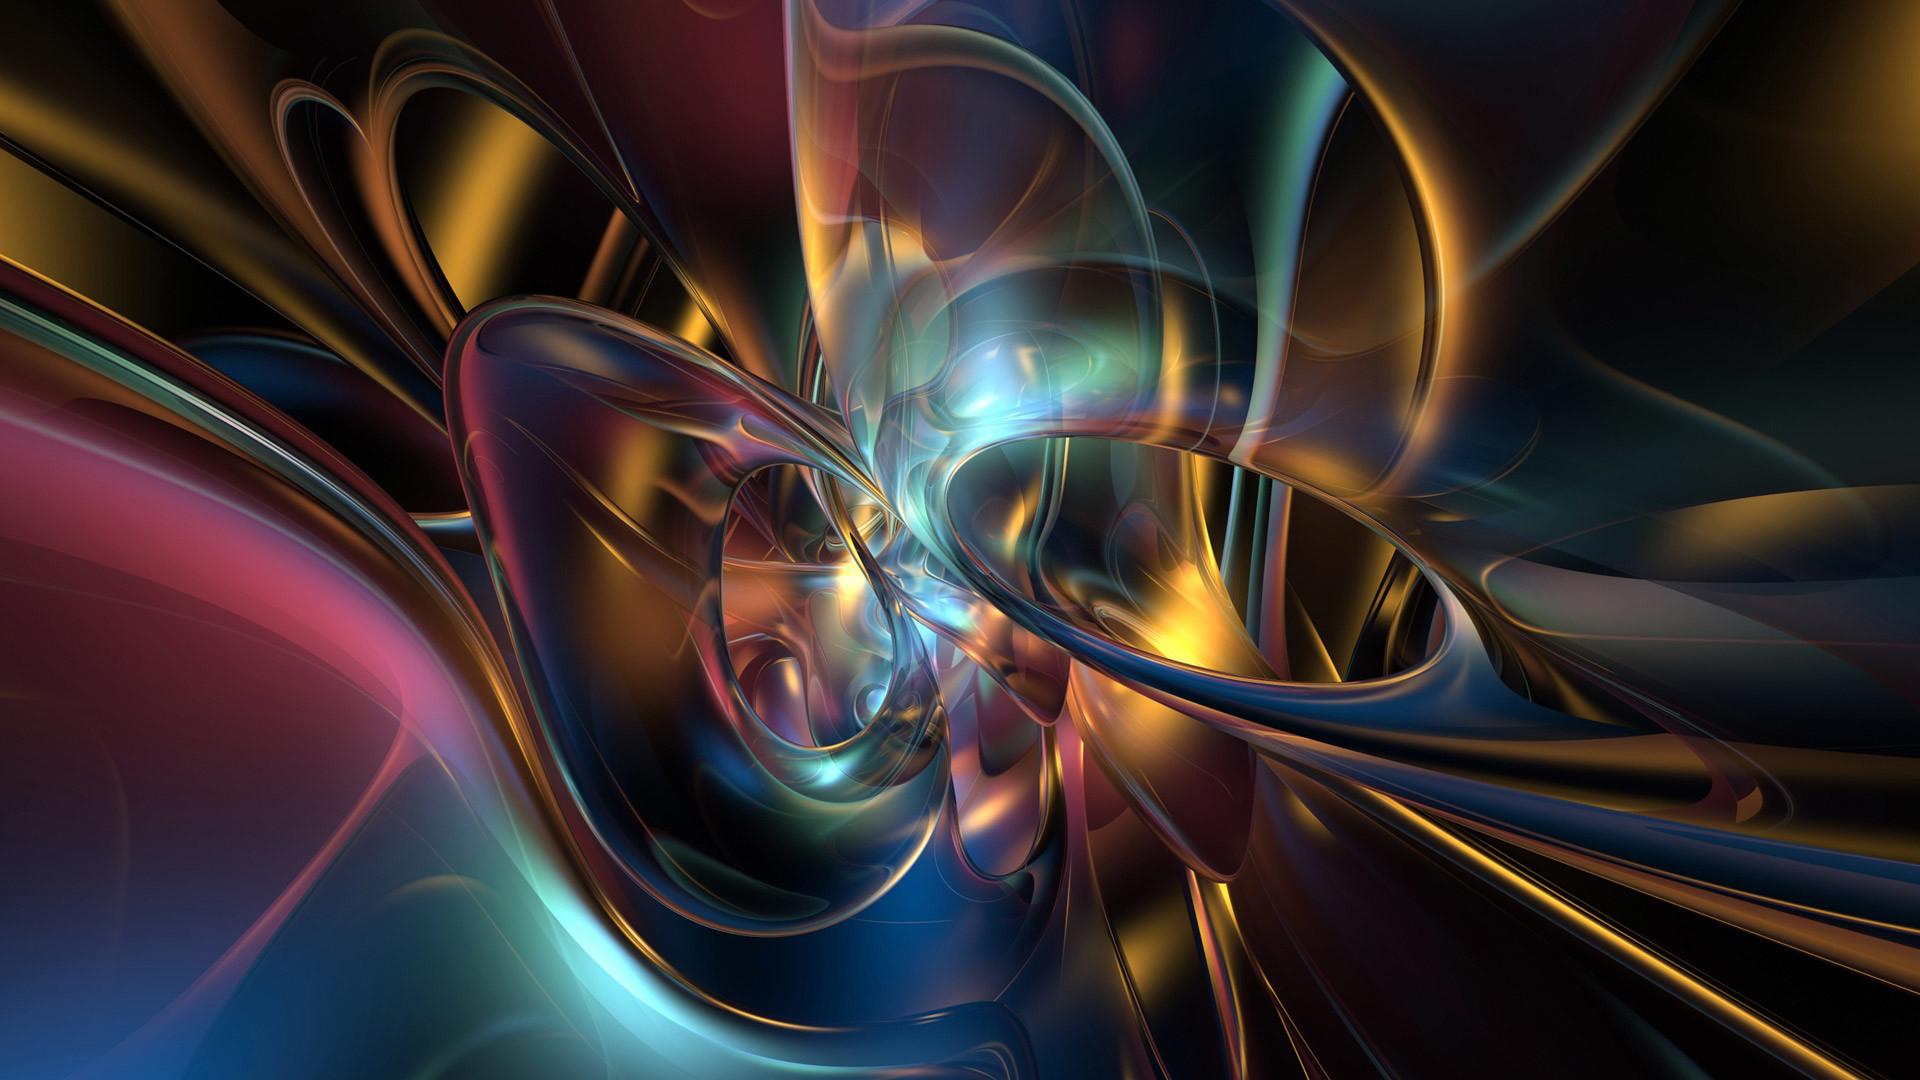 1920x1080 Abstract Design 1080p Wallpapers | HD Wallpapers